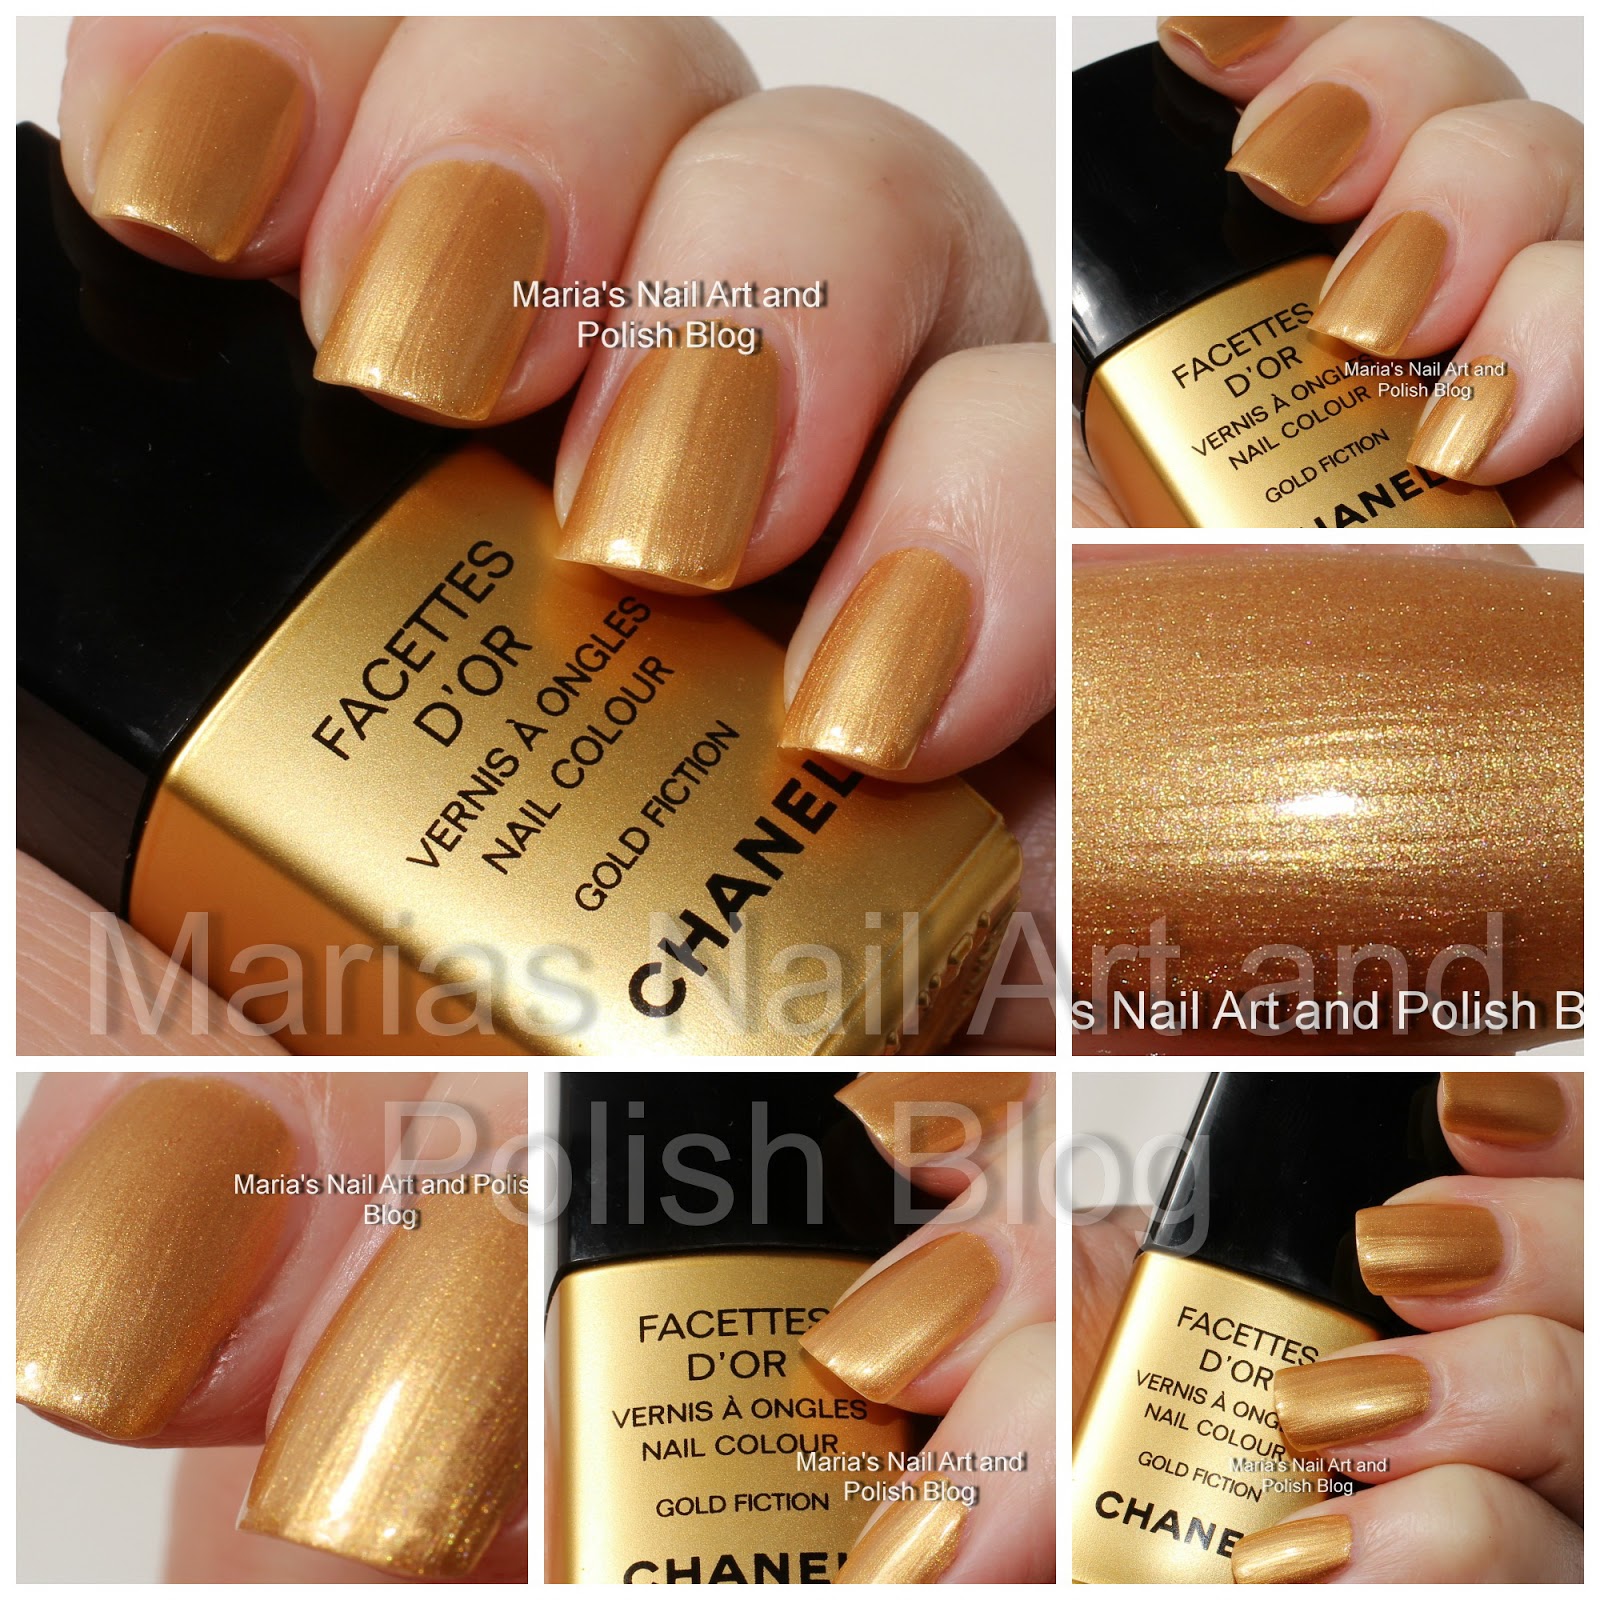 Marias Nail Art and Polish Blog: Chanel Gold Fiction swatches (Facettes  D'Or Gold Fiction), Gold Rush collection - comparisons